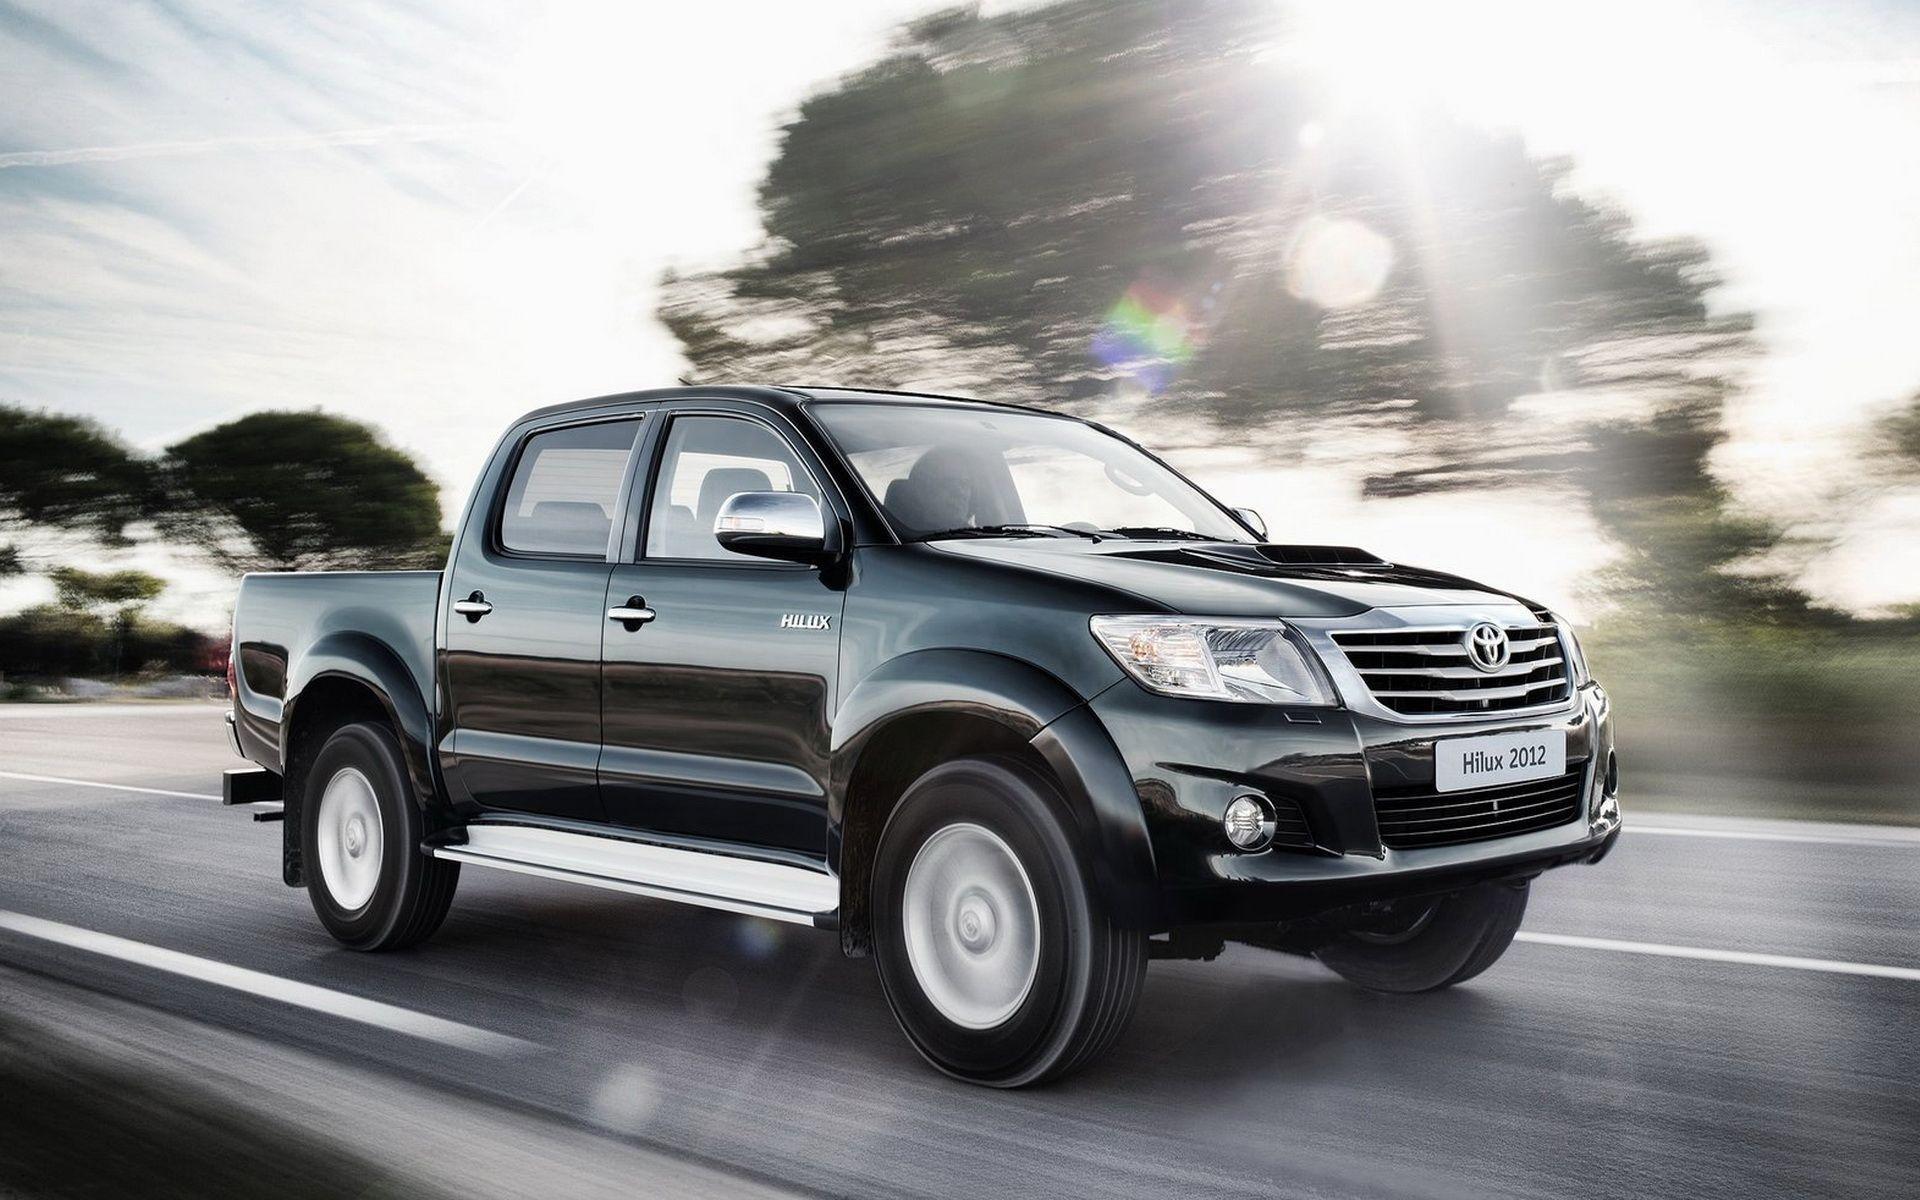 Toyota Hilux Wallpaper And Image, Picture, Photo